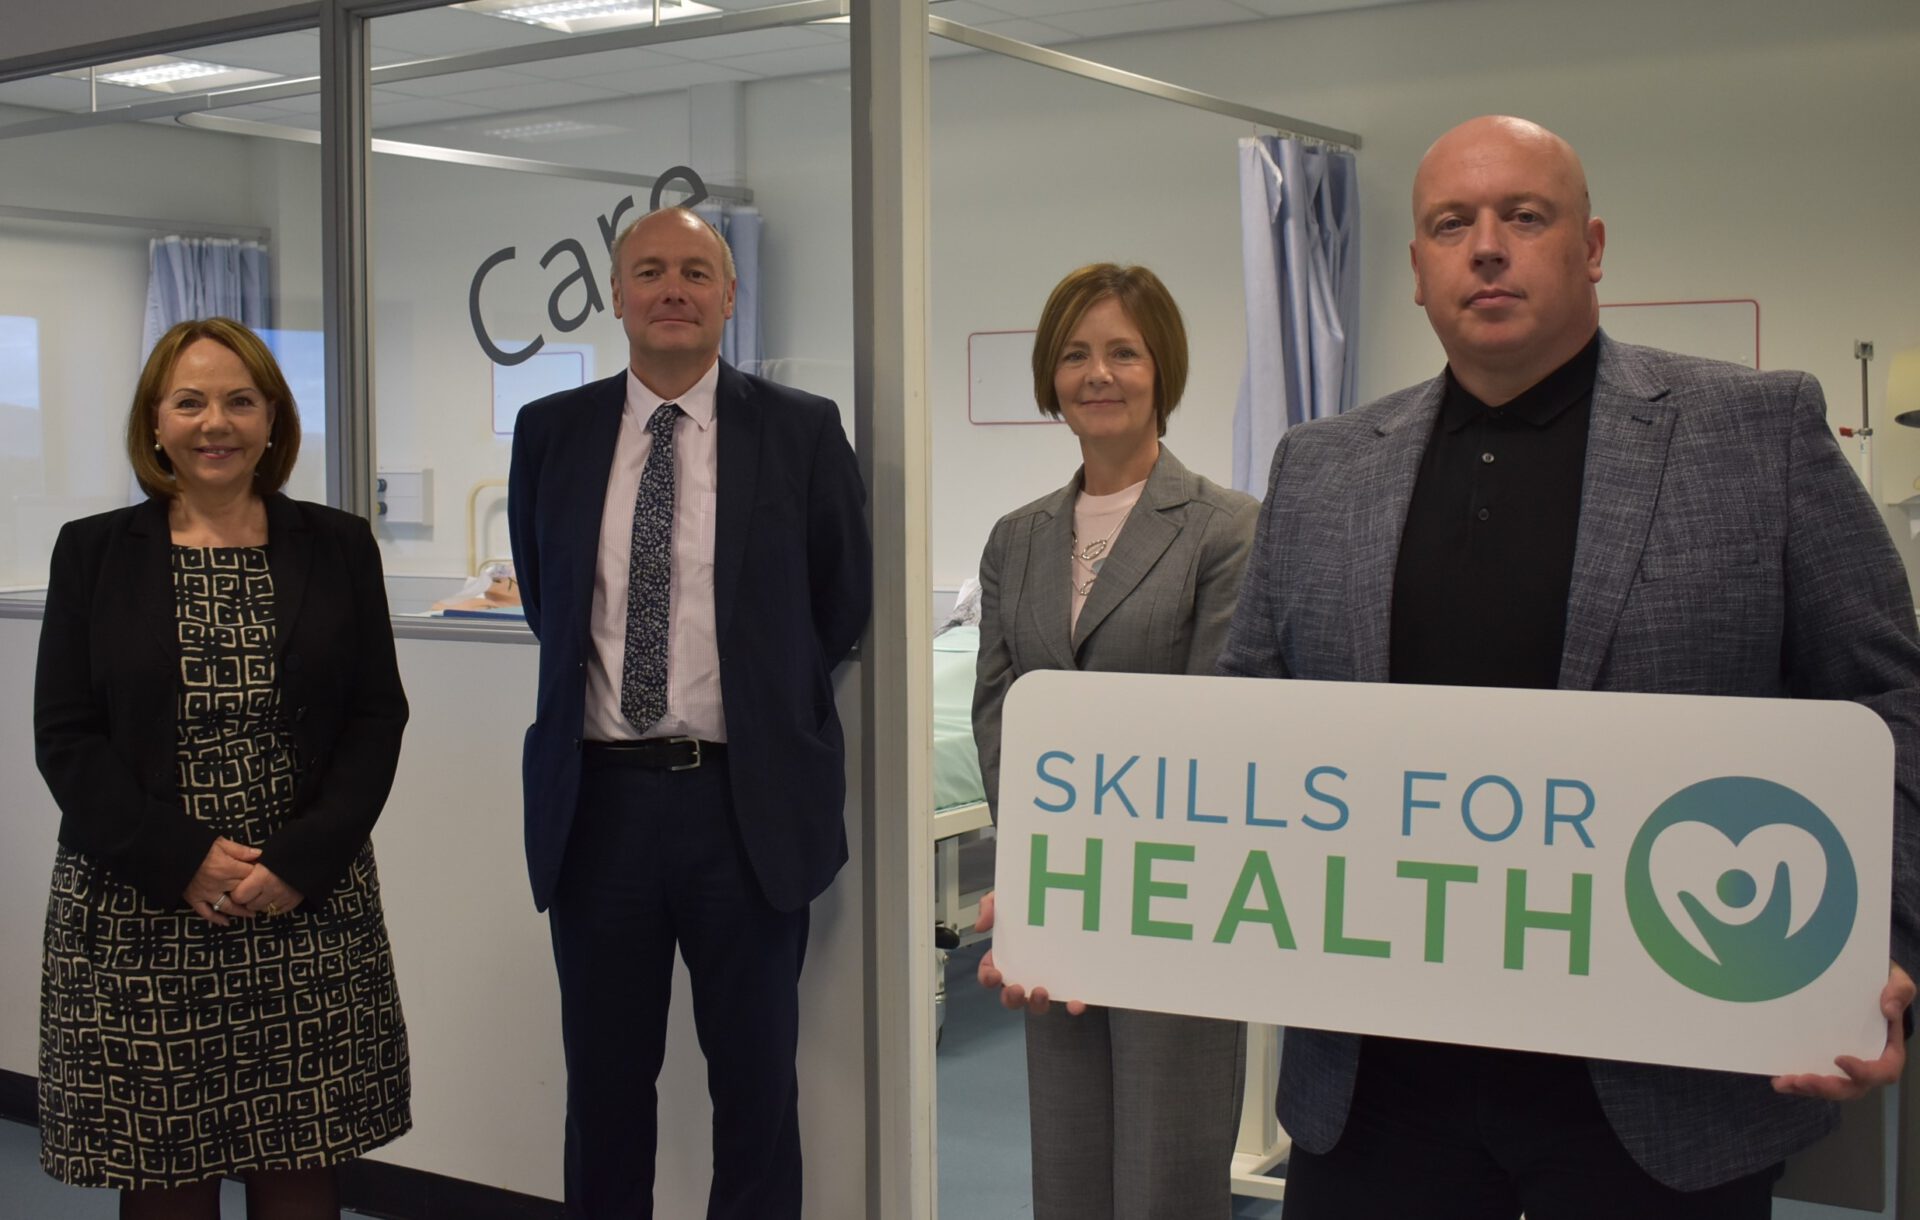 Colleges collaborate to support NHS and careers in healthcare